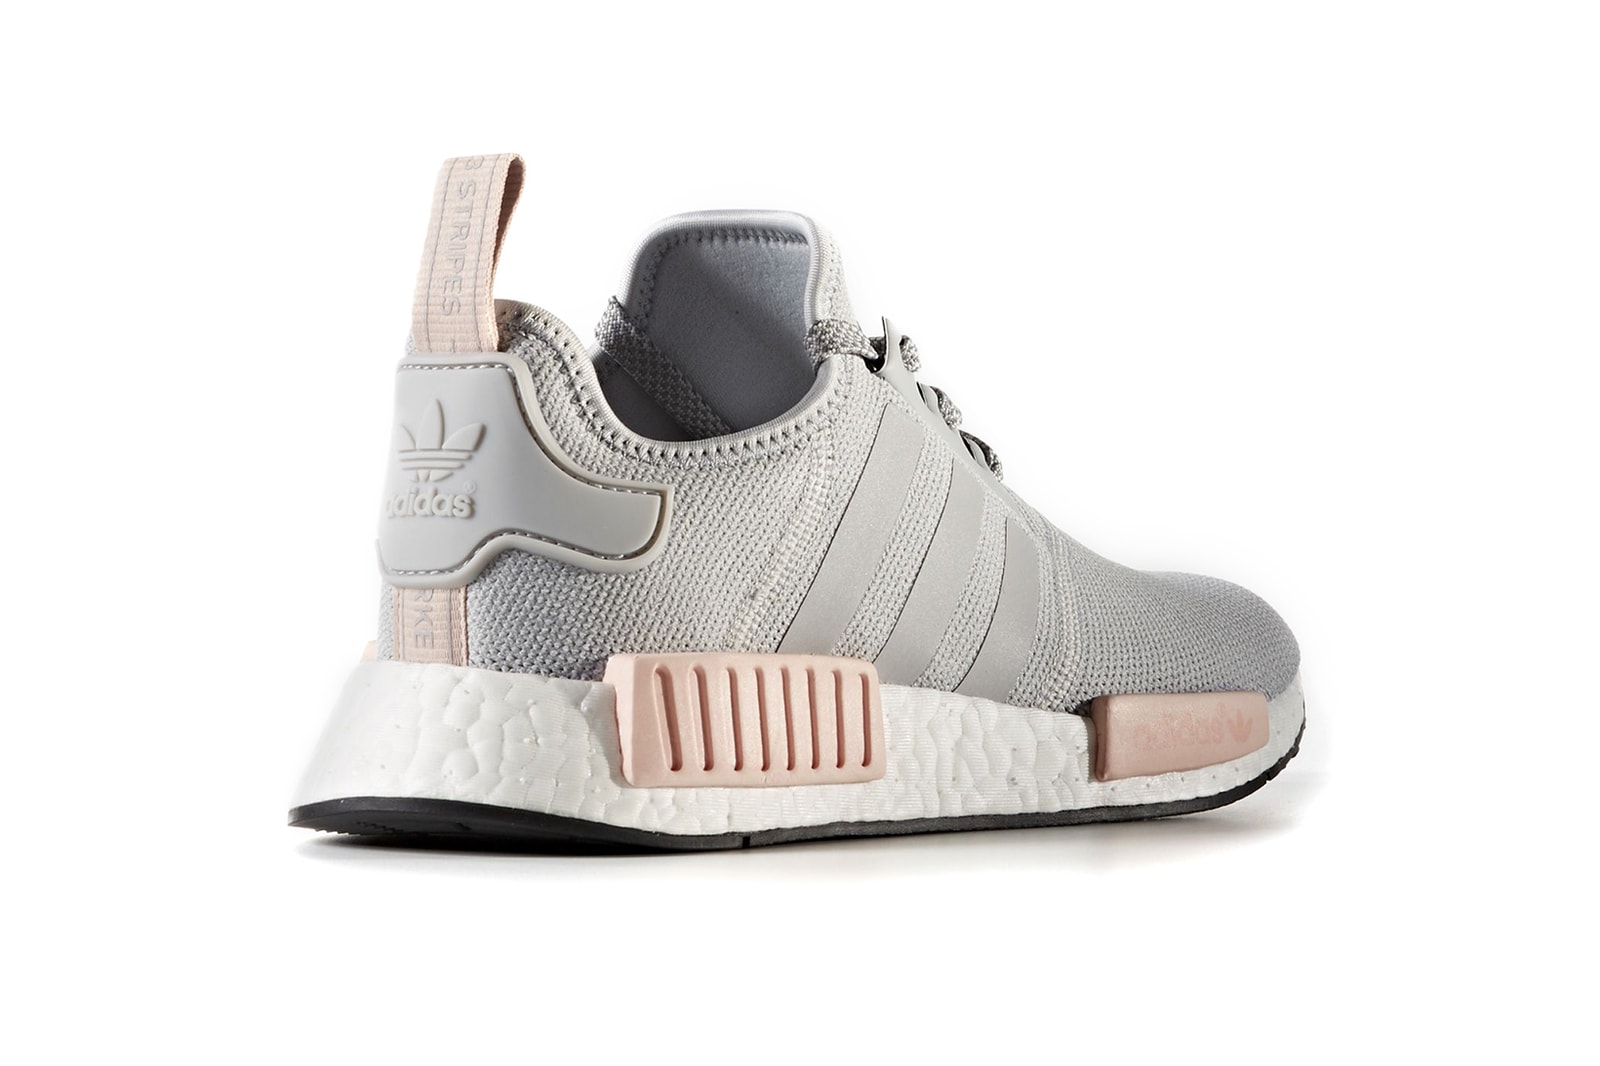 altura Disipar leninismo The Pink and Grey adidas NMDs Are Restocking | Hypebae